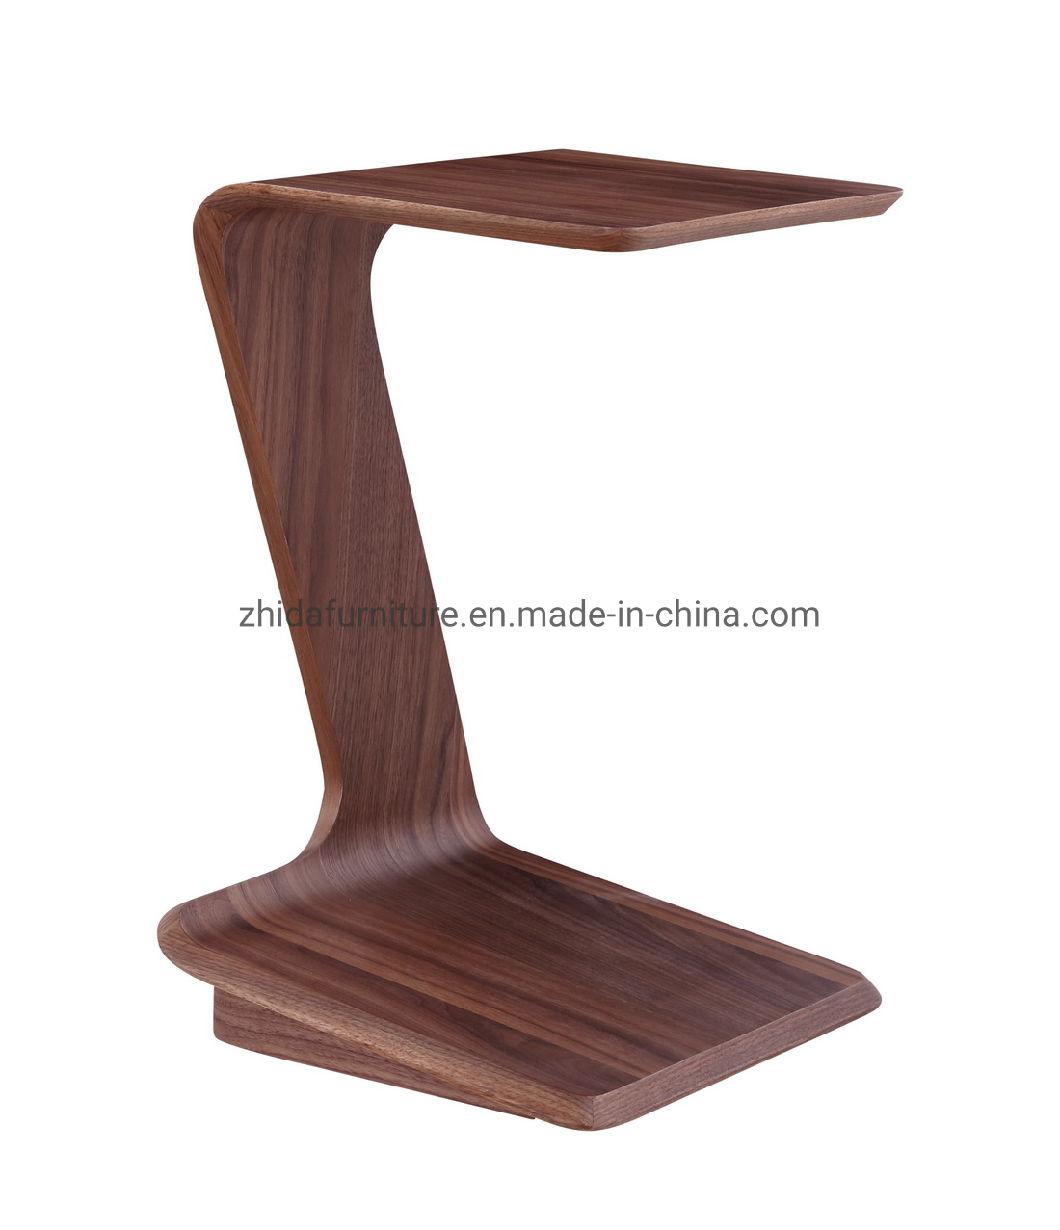 Home Furniture Living Room Sofa Side Table Book Coffee Table